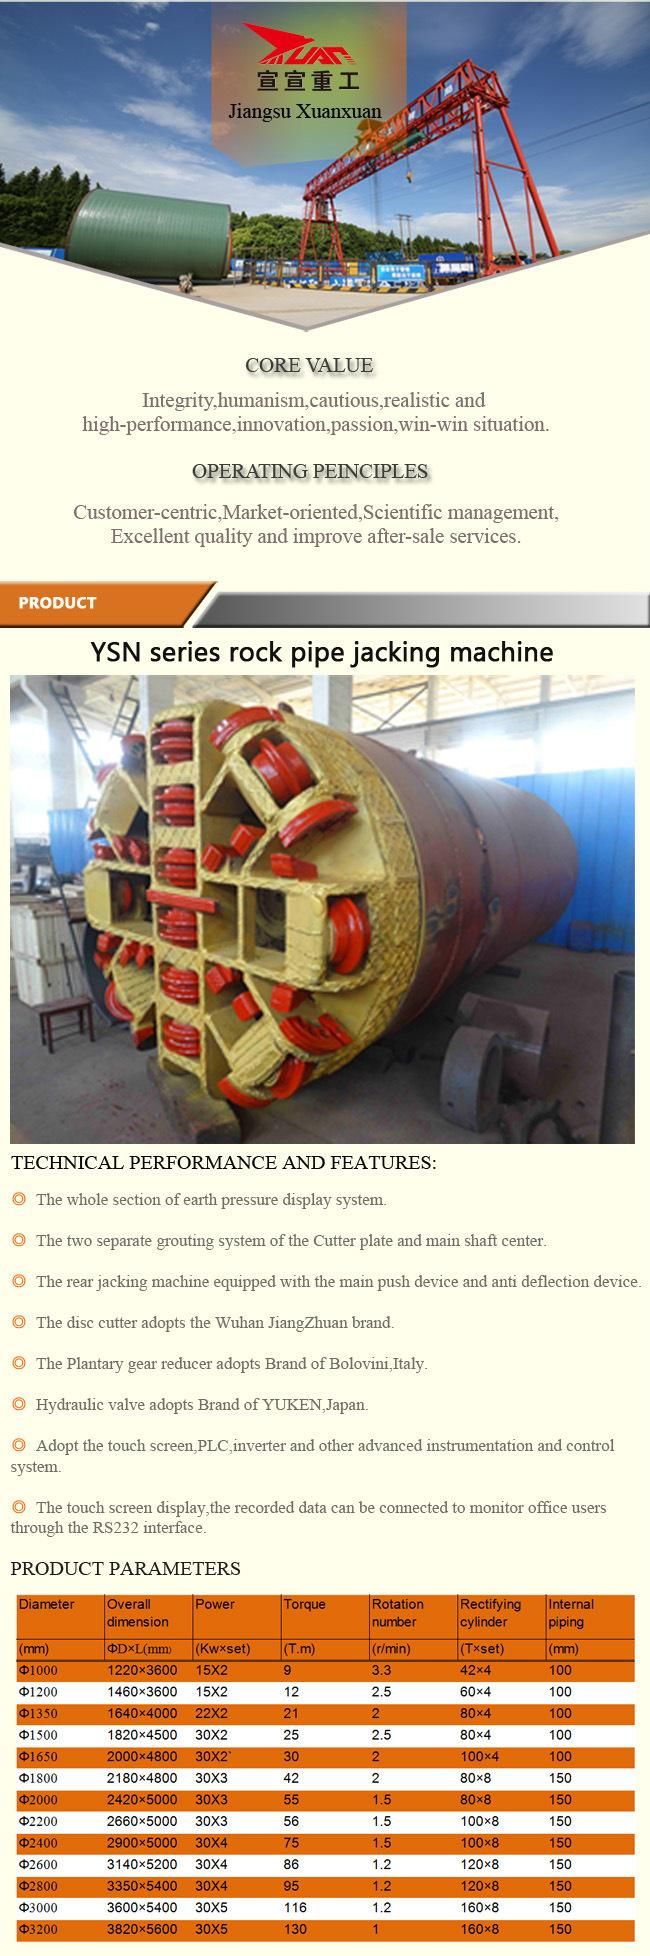 Pipe Jacking Machine for Sewage Pipes